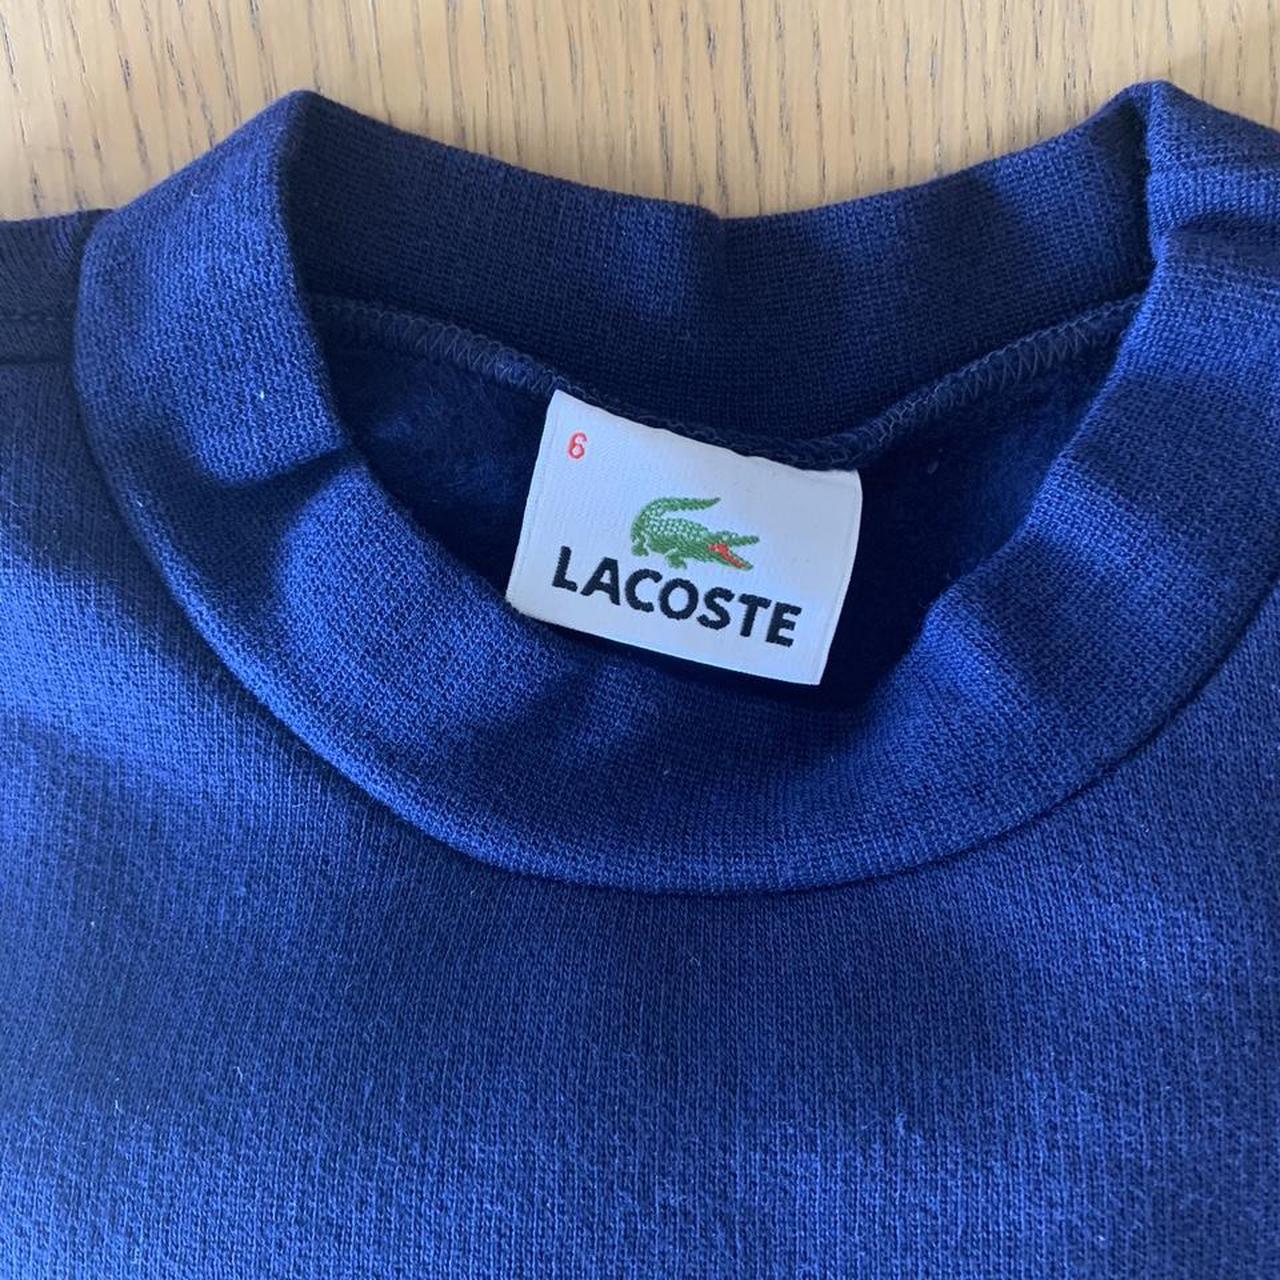 Pull Lacoste coton ! Brand new ! Never worn - Depop